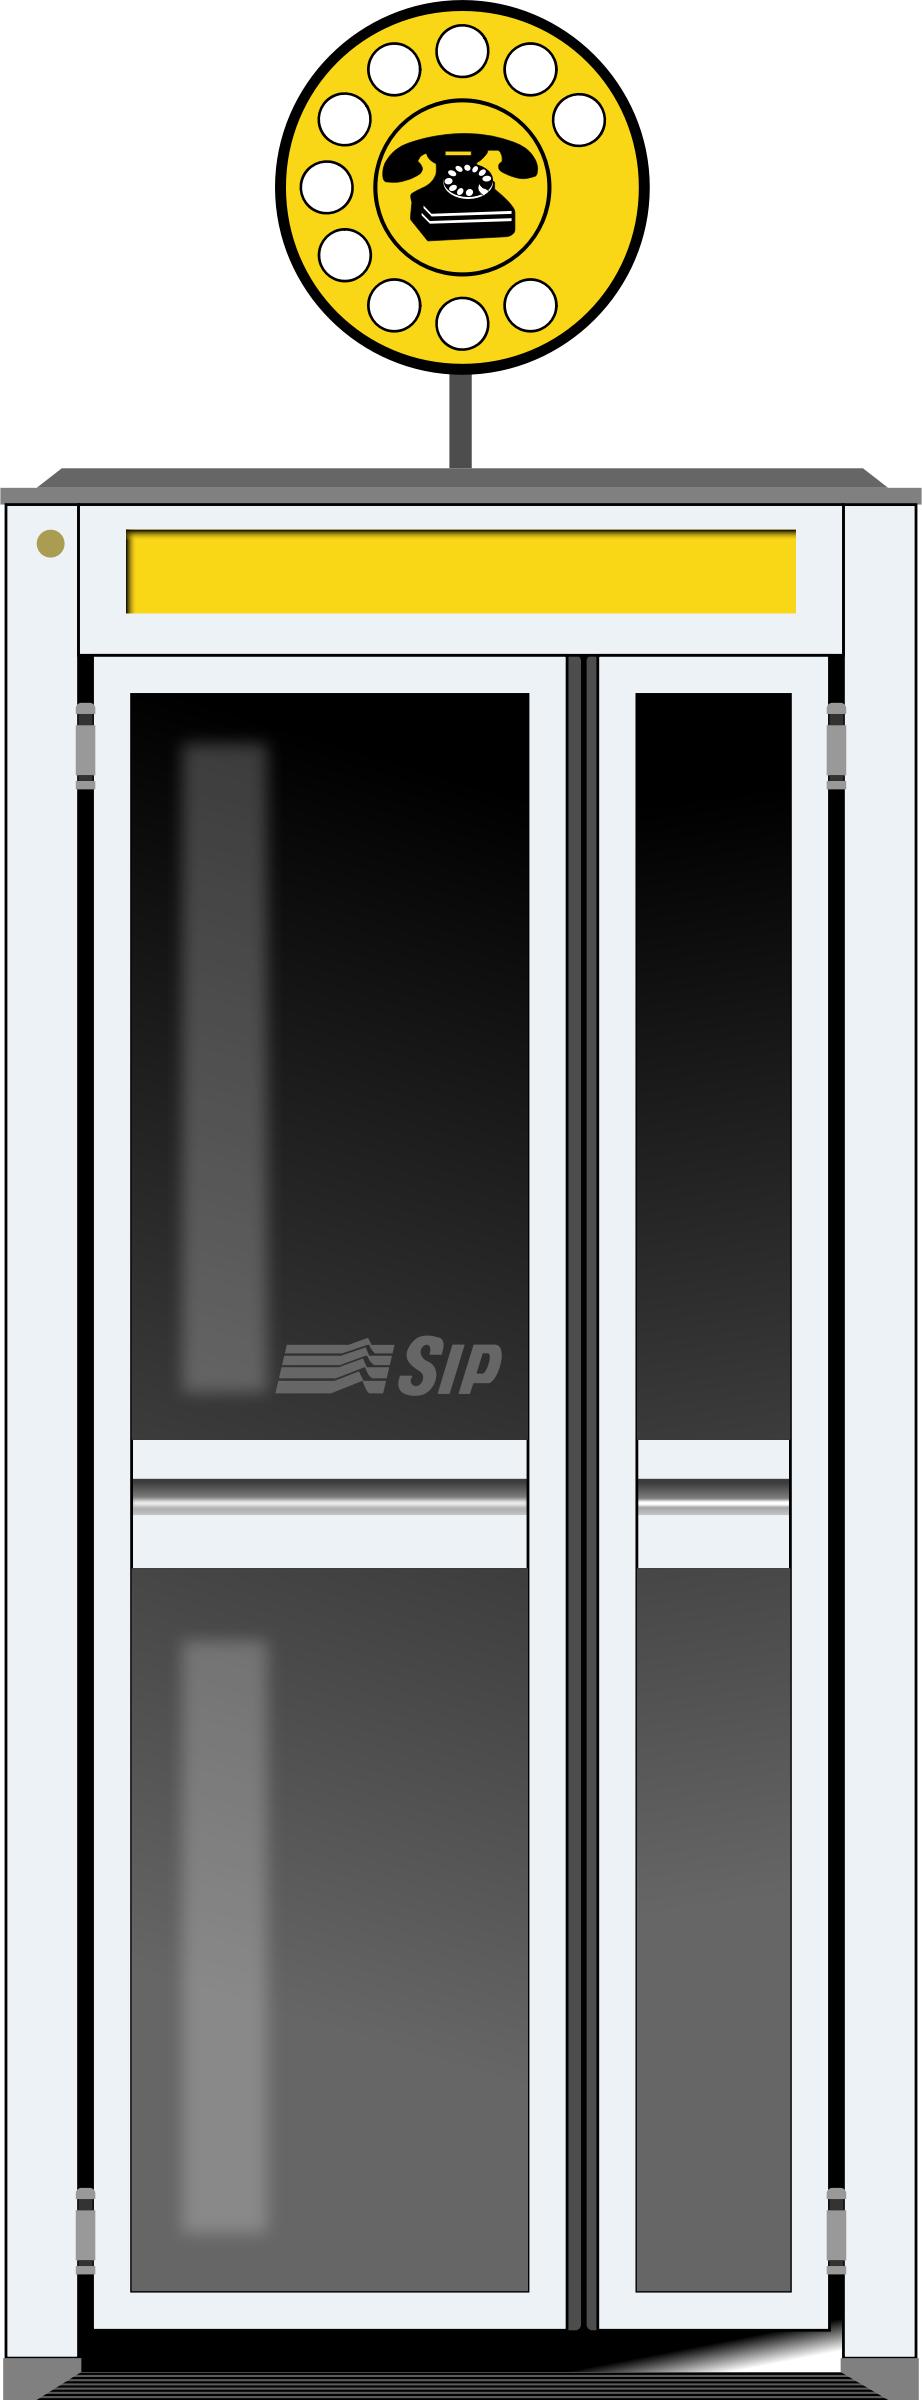 Telephone booth png